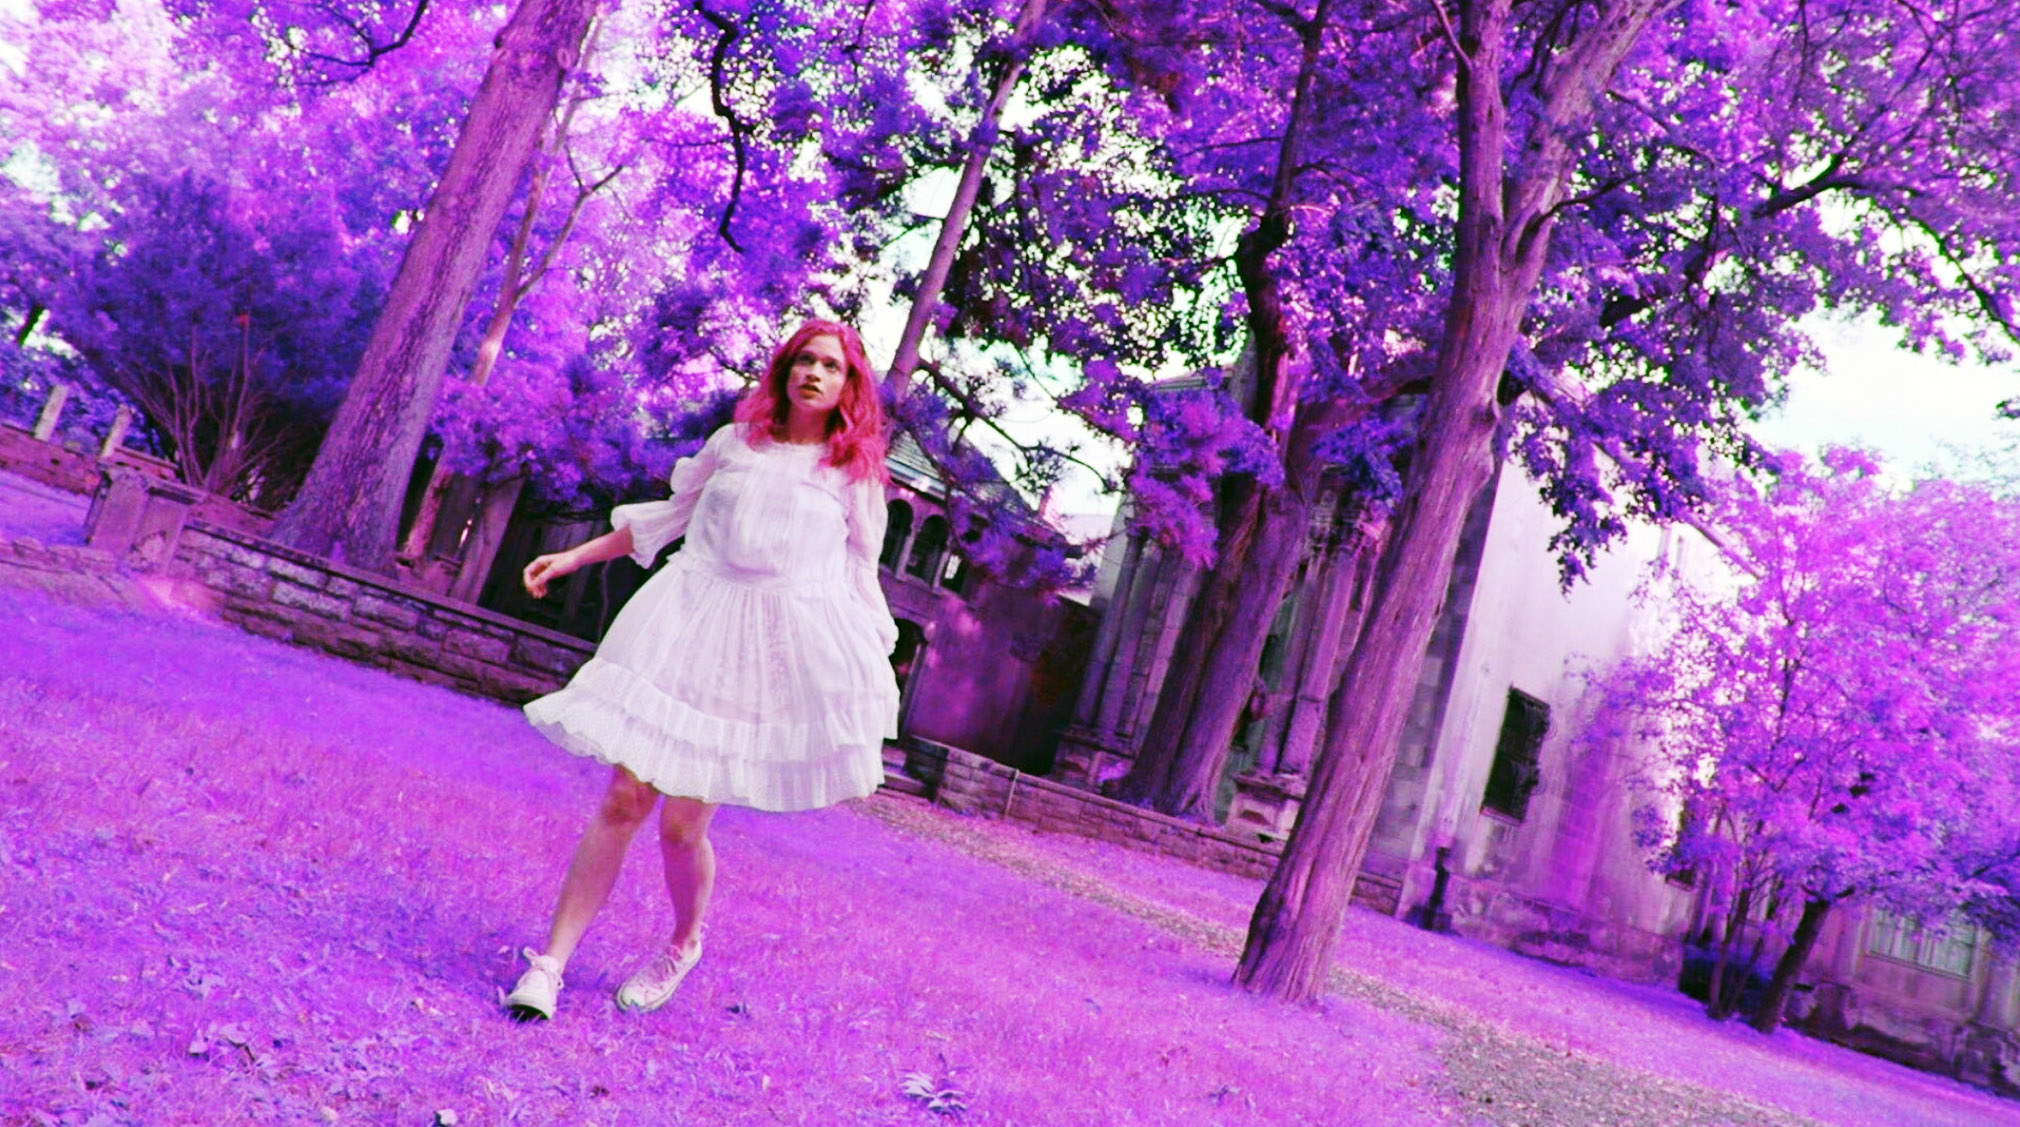 A young, pink-haired woman walks through a surreal purple forest in &quot;Braid&quot;